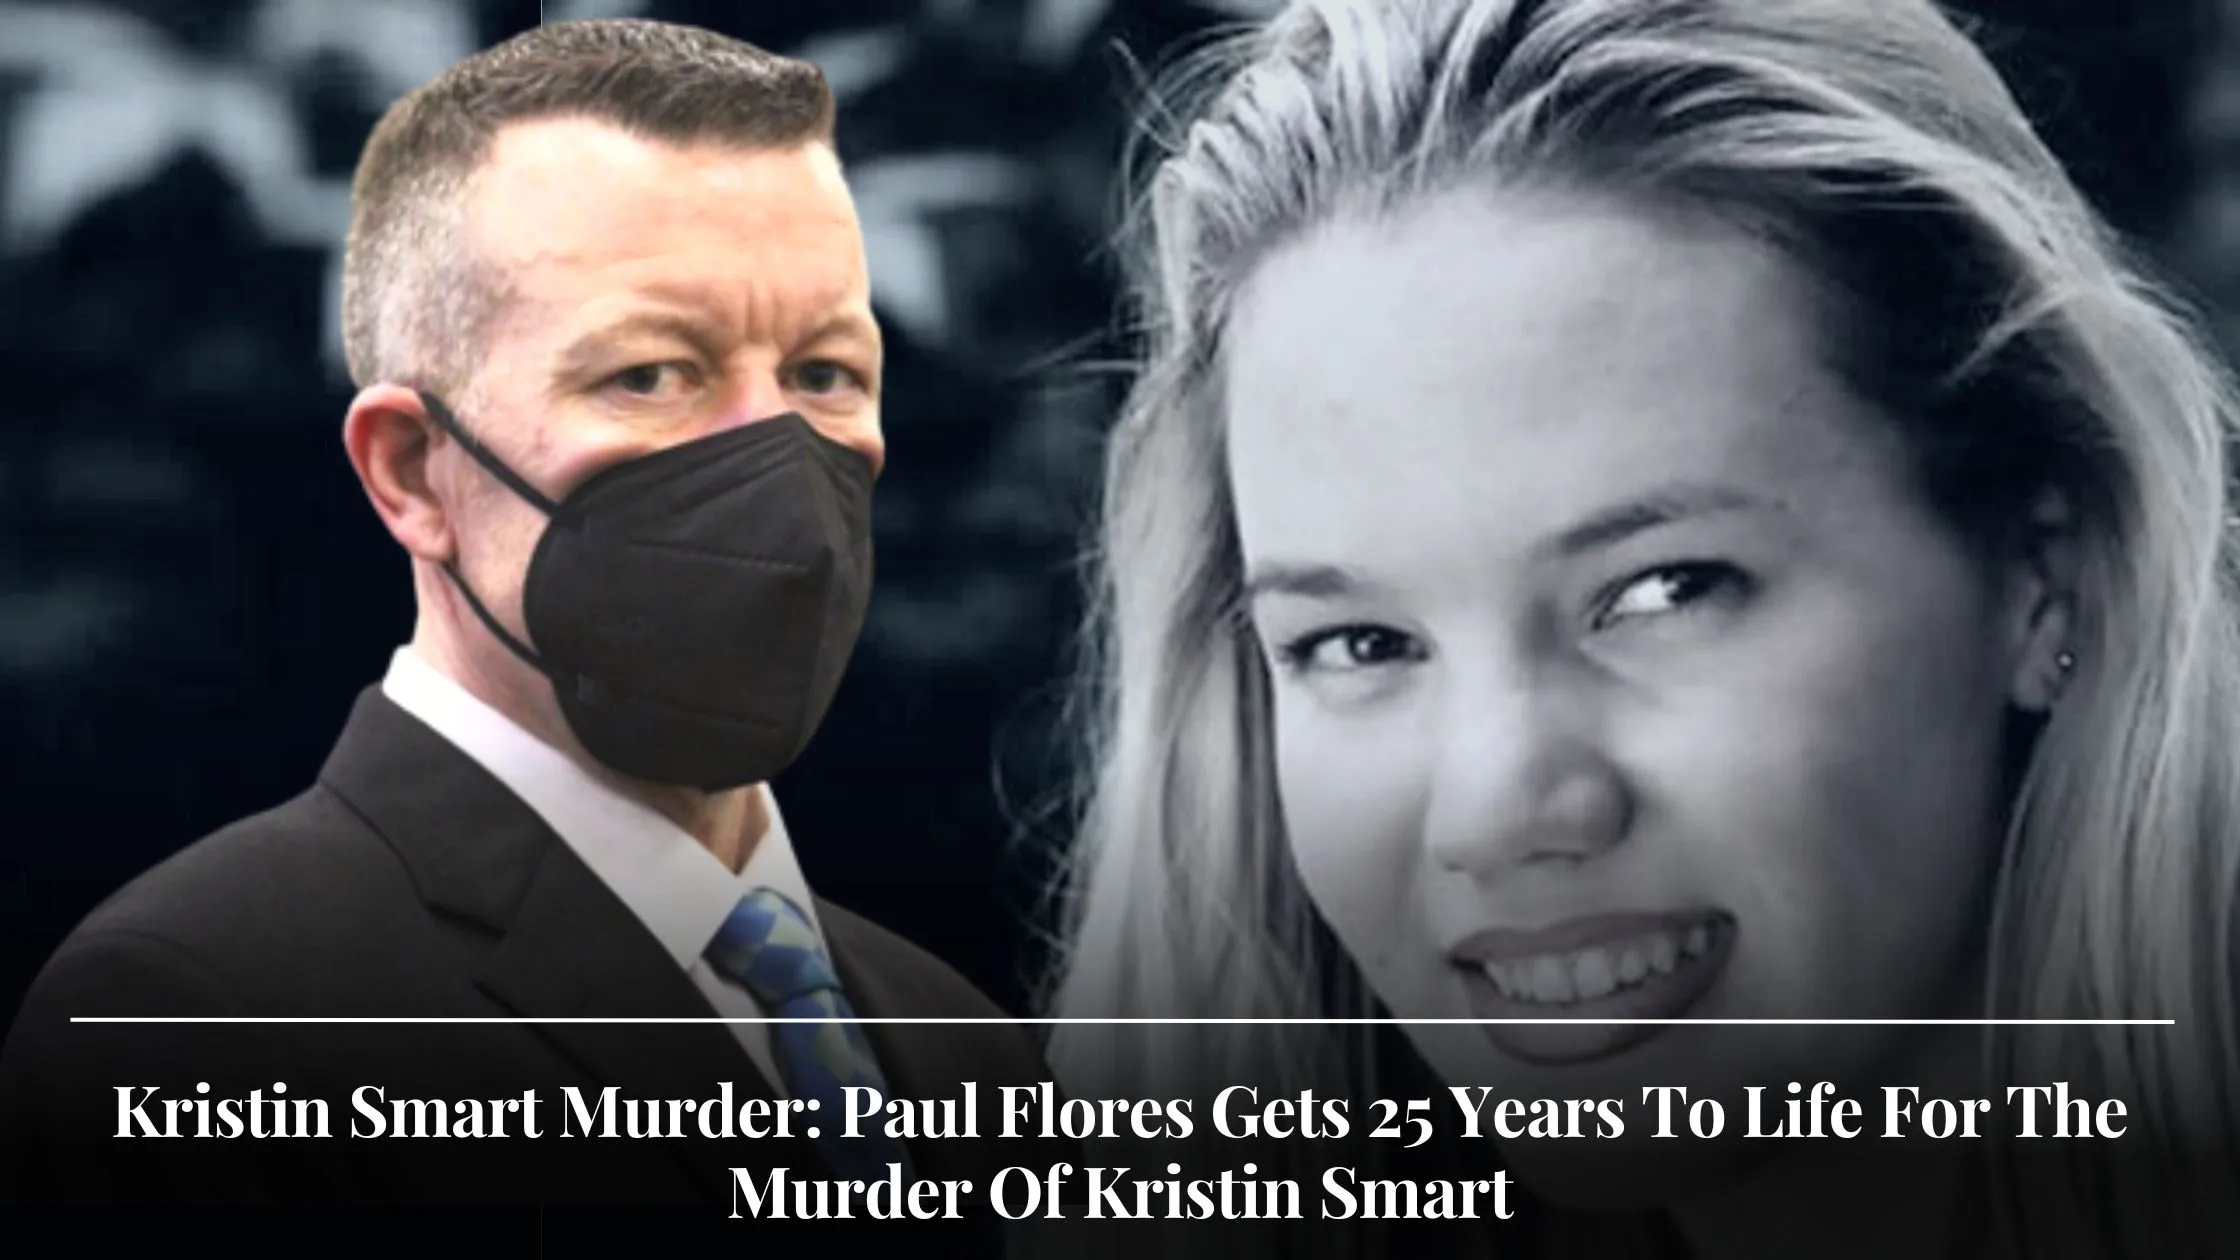 Kristin Smart Murder Paul Flores Gets 25 Years To Life For The Murder Of Kristin Smart